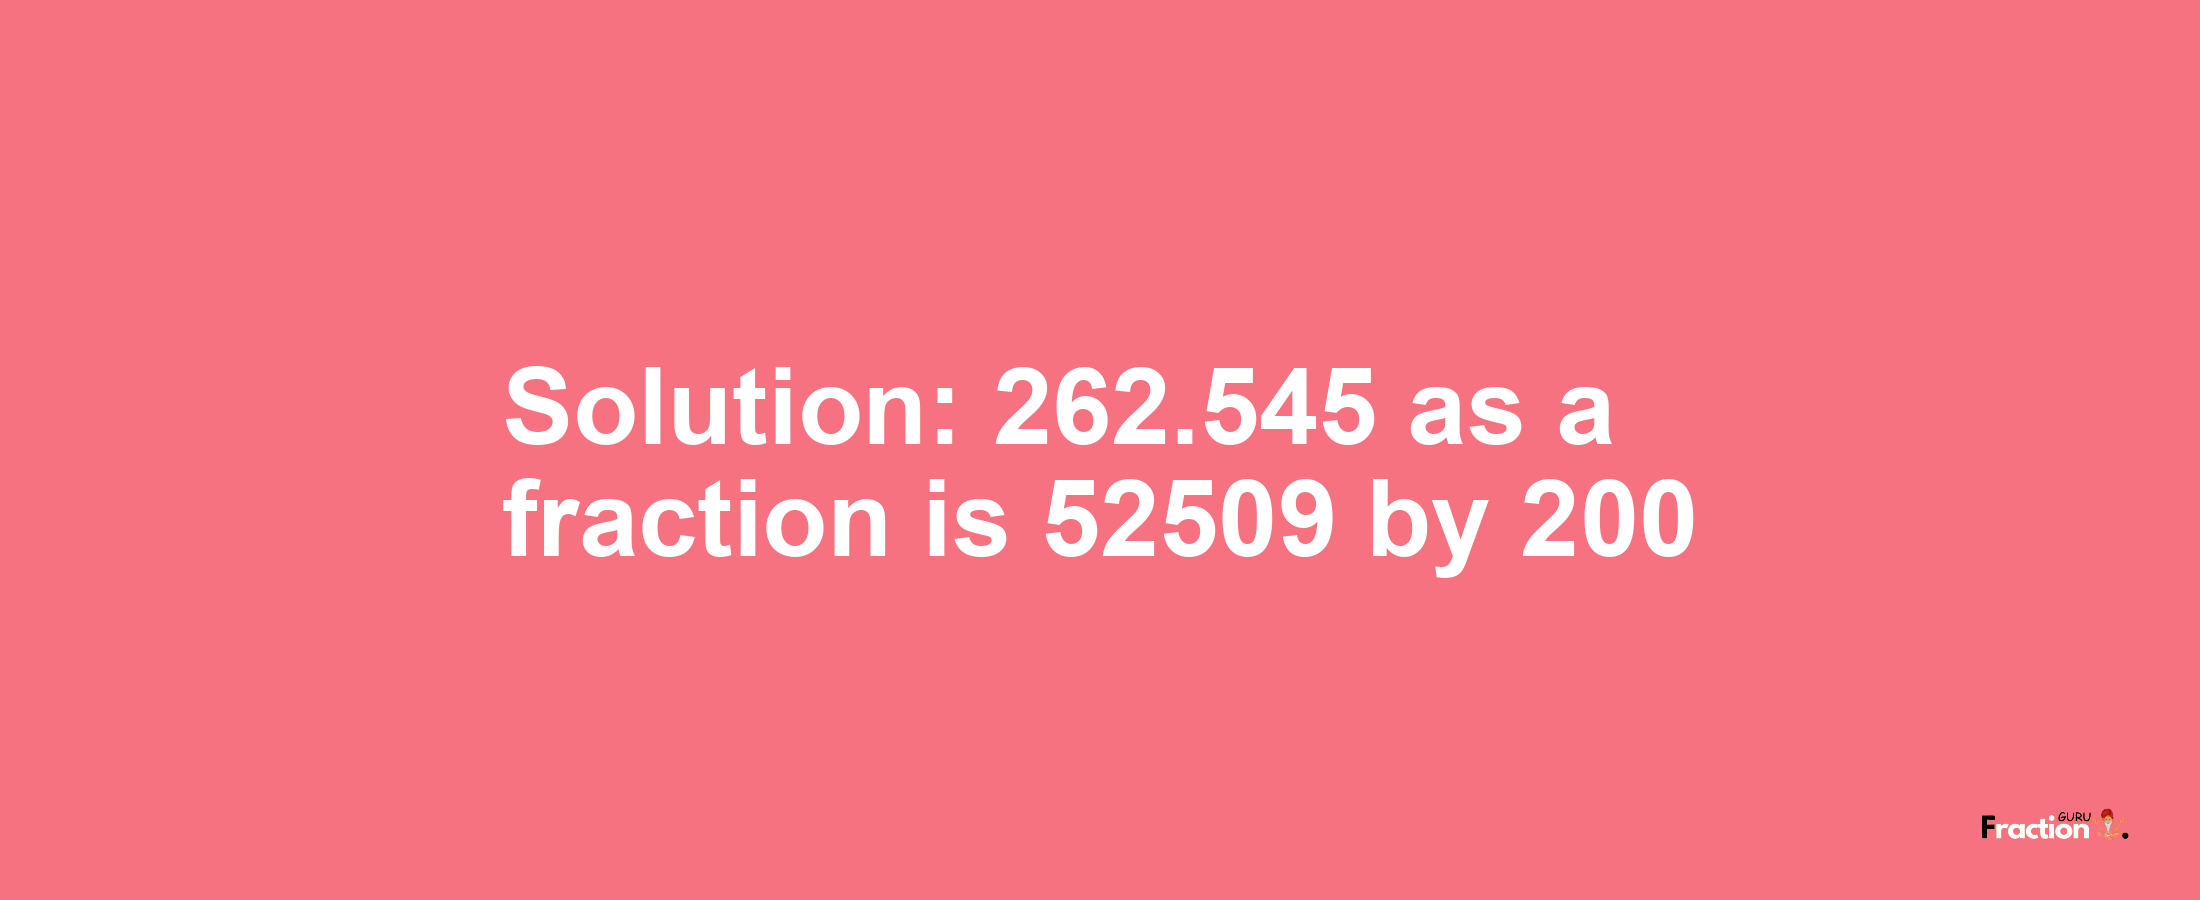 Solution:262.545 as a fraction is 52509/200